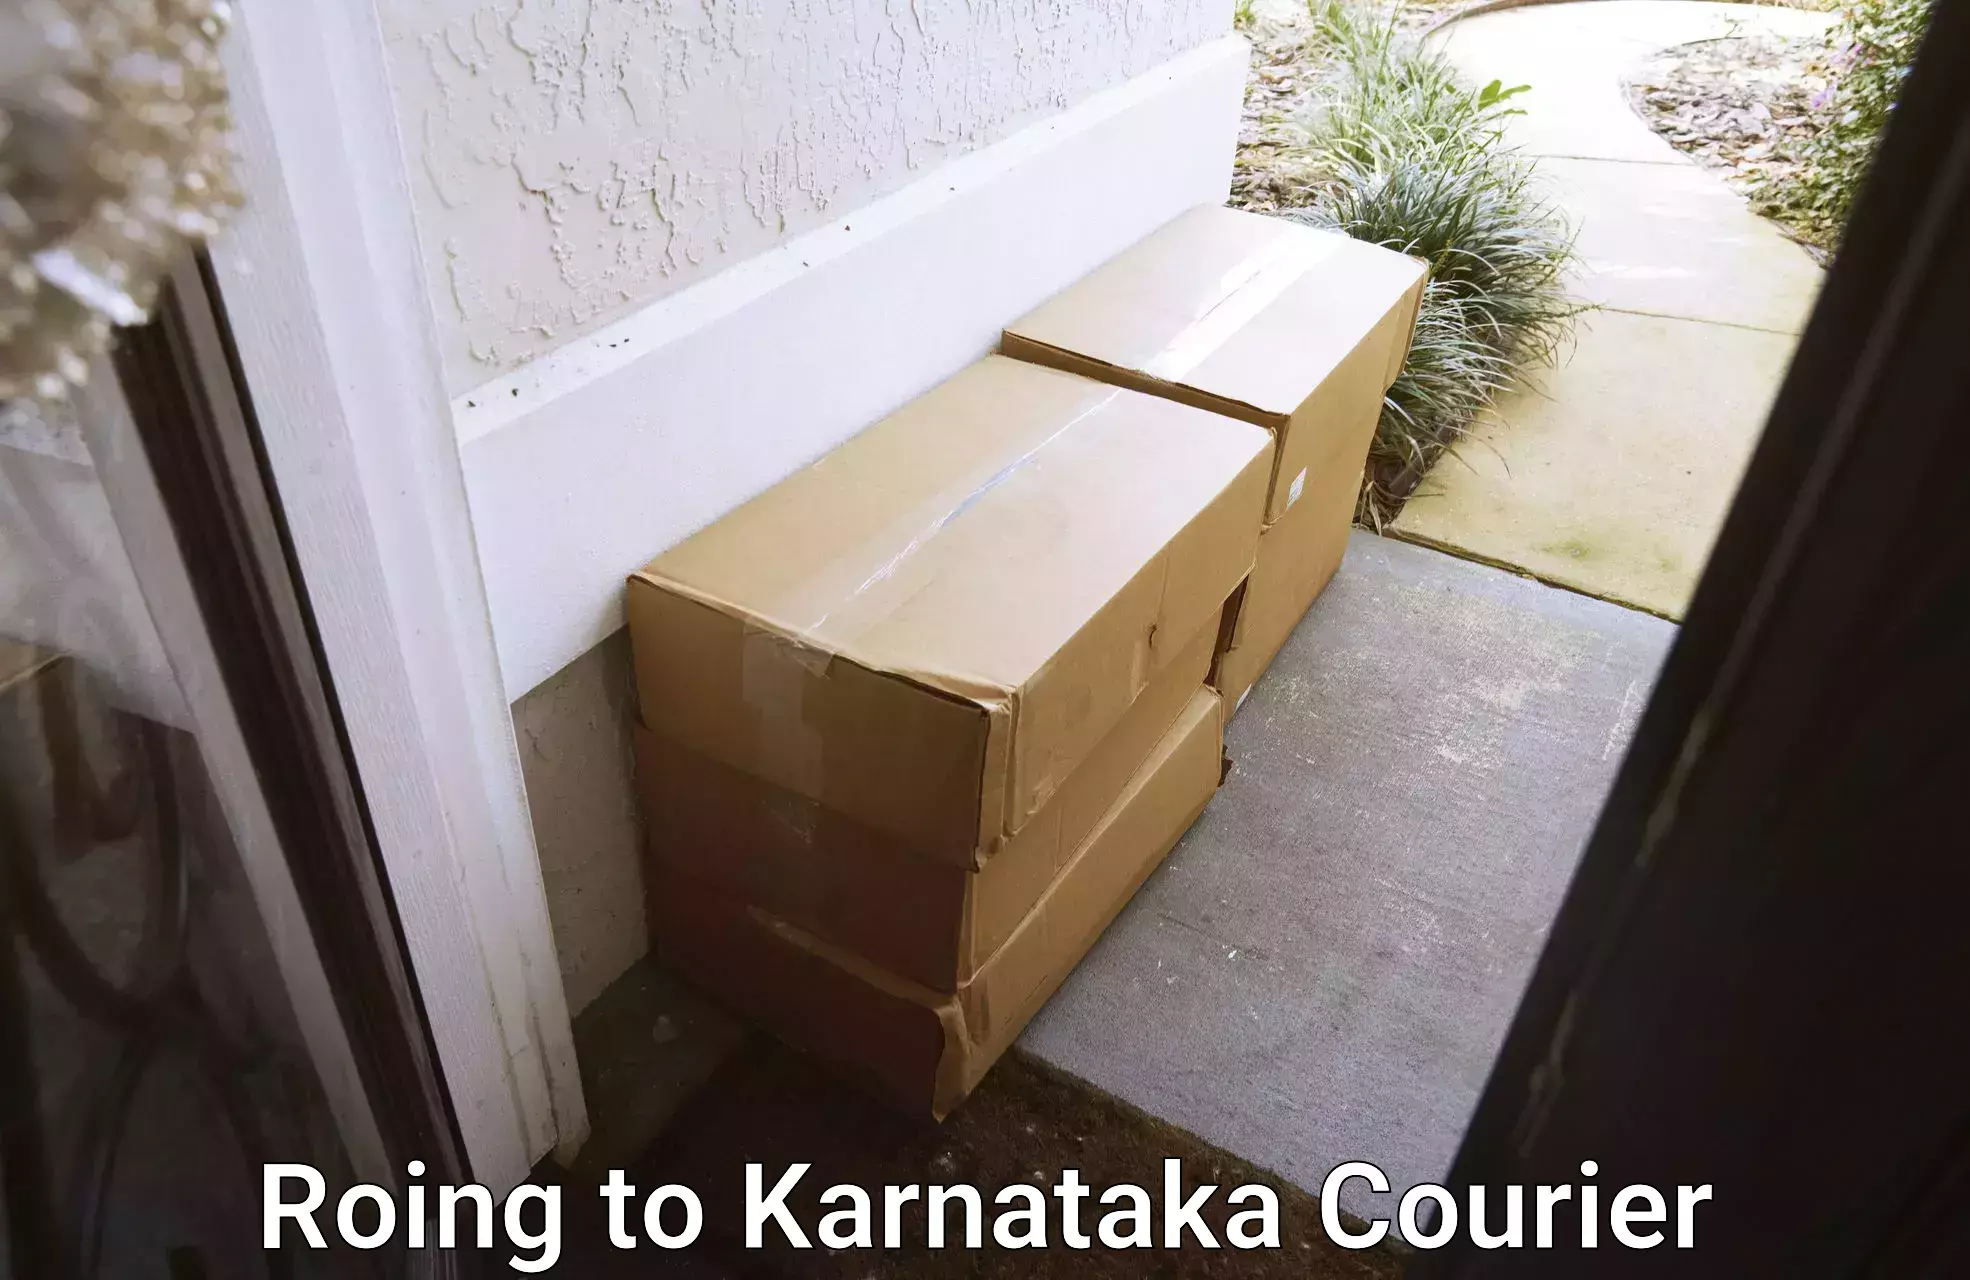 Next-day delivery options in Roing to Karnataka